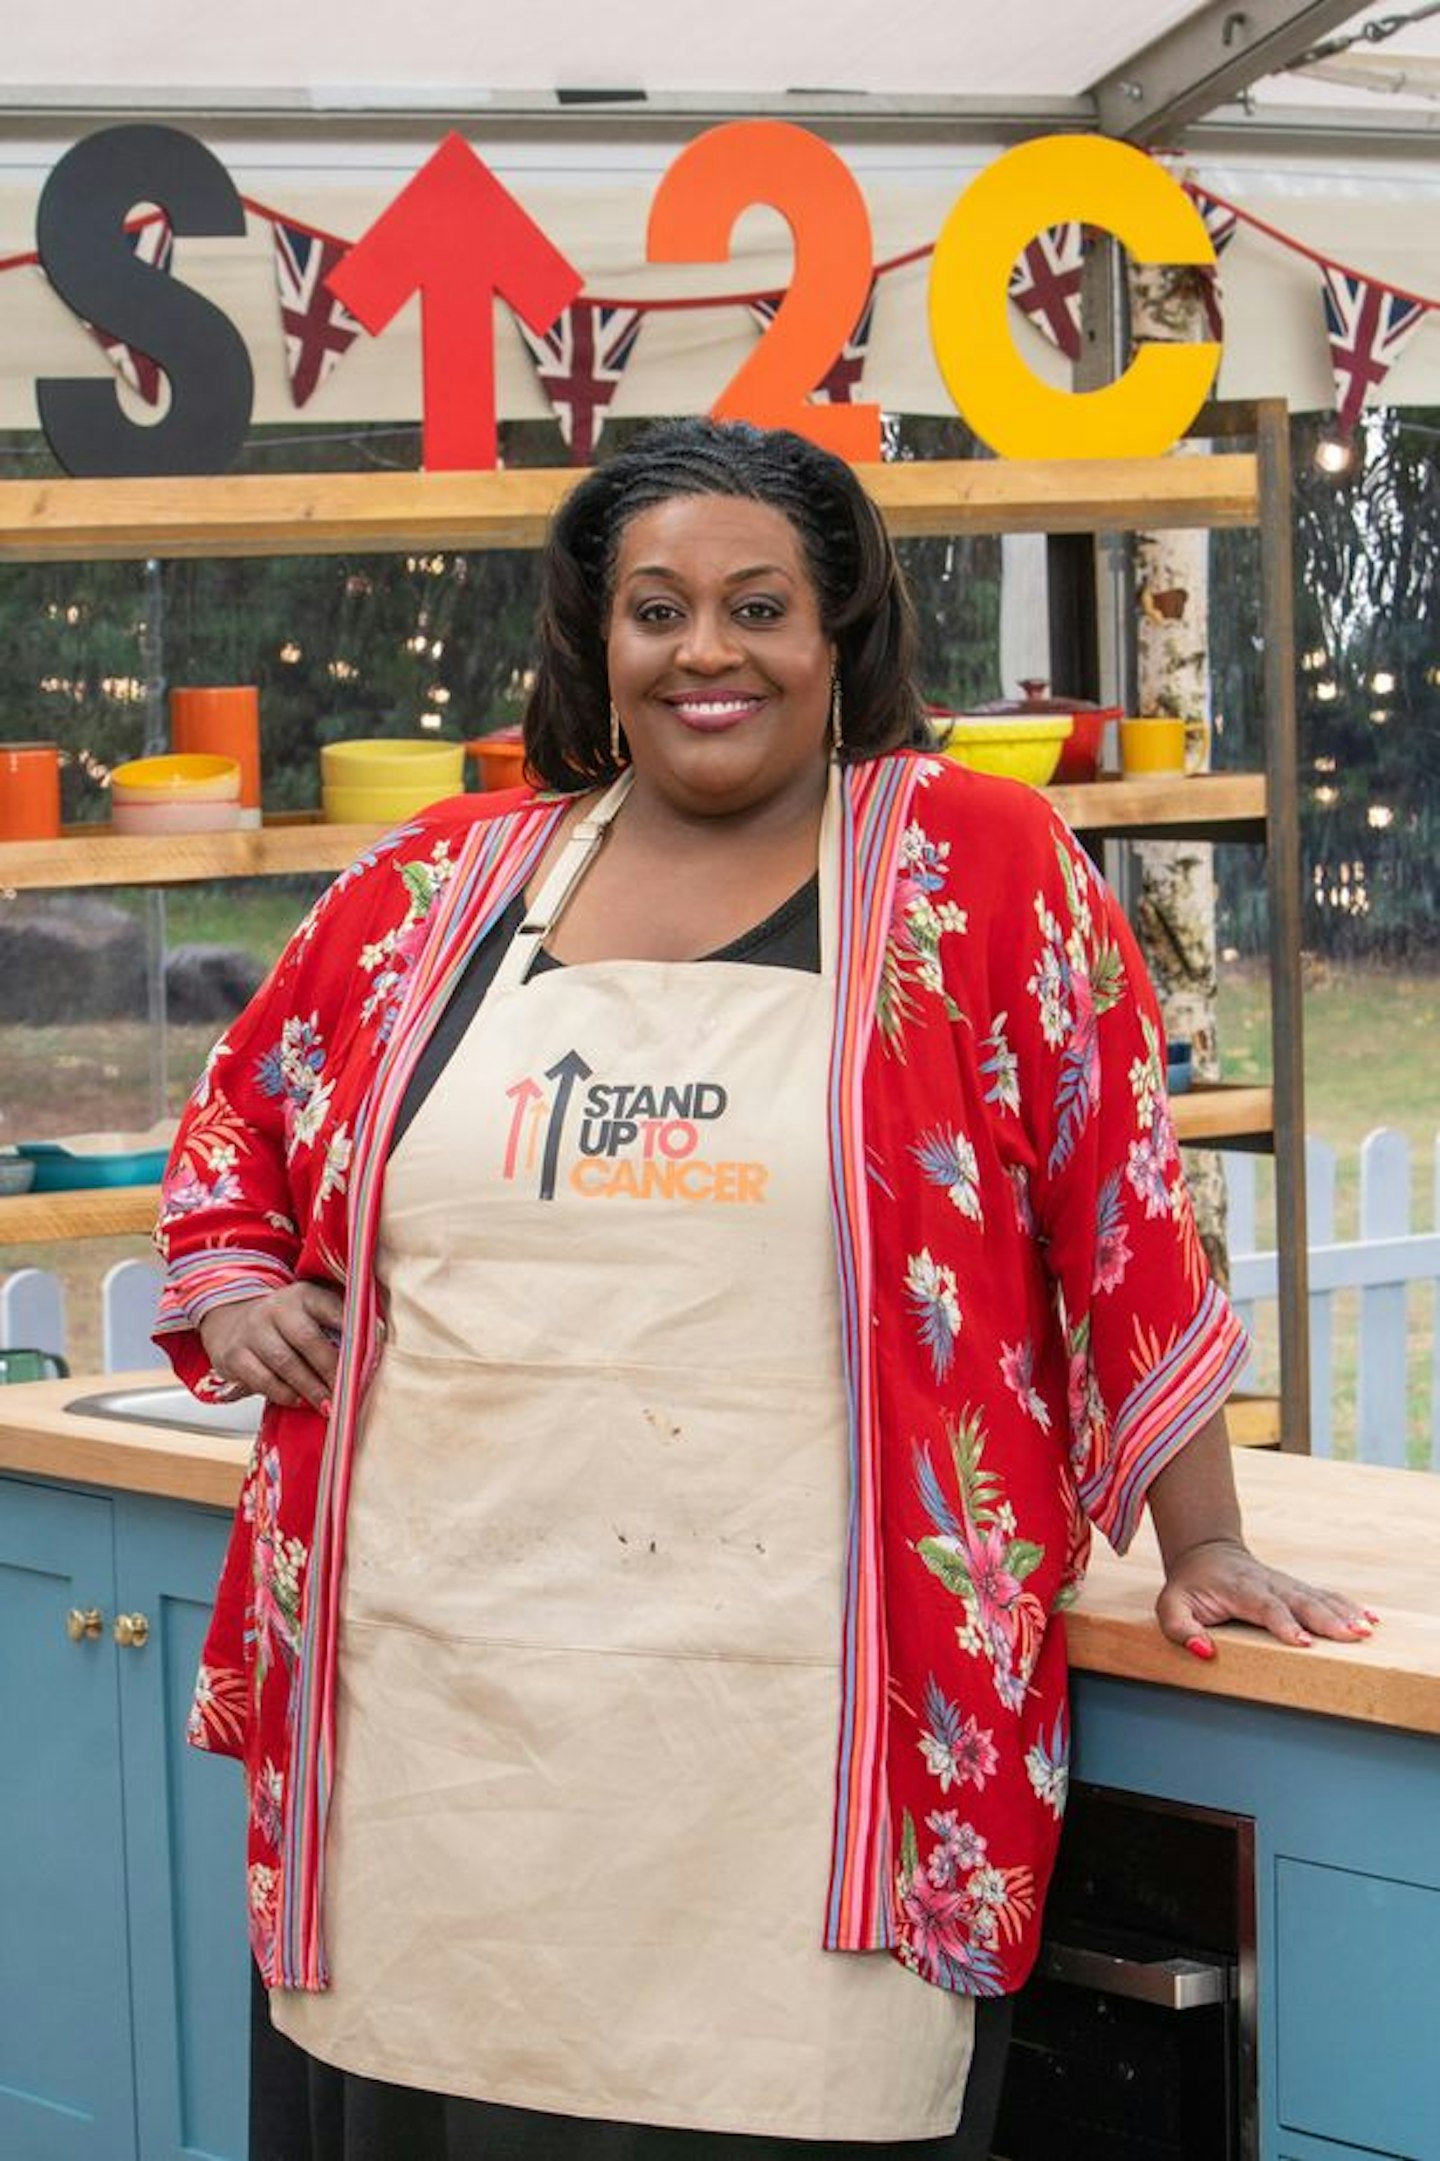 Alison Hammond is the new co-host on The Great British Bake Off